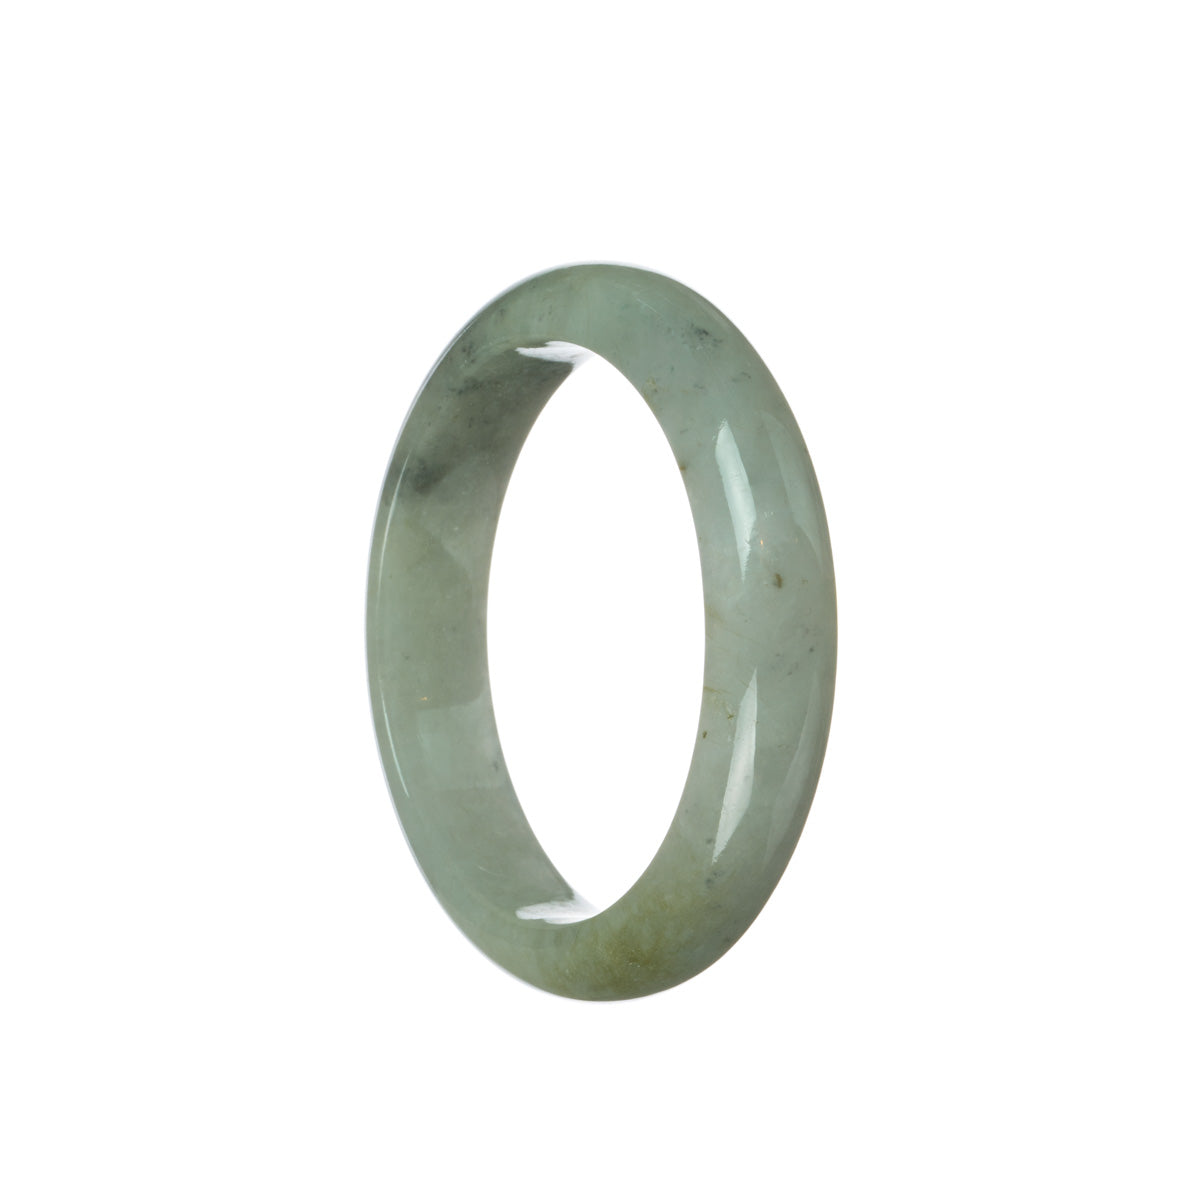 An elegant light grey jadeite bangle bracelet with a semi-round shape, measuring 55mm in diameter. Made from authentic grade A jadeite, this bracelet from MAYS is a timeless and sophisticated accessory.